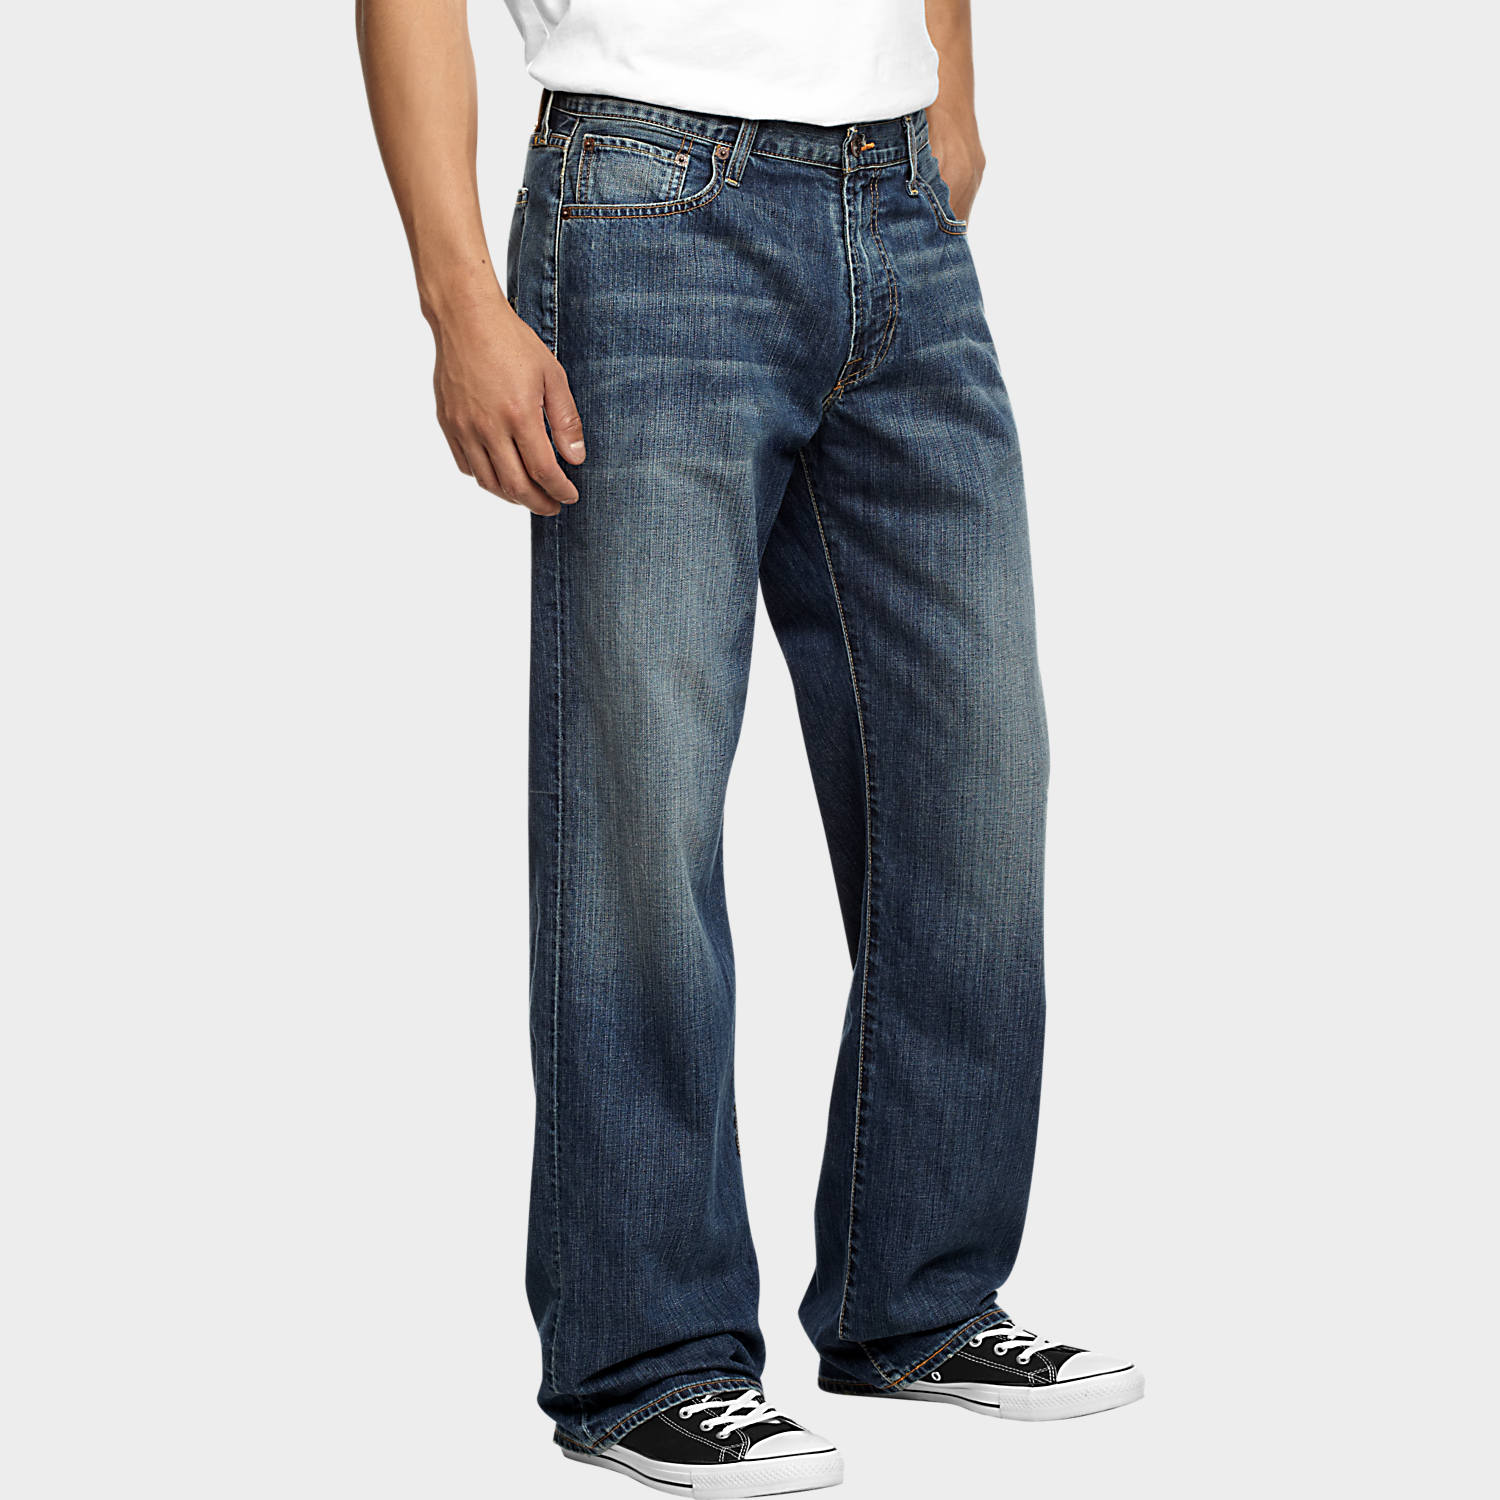 Big & Tall Jeans, Men's Designer Jeans for Big & Tall | Men's Wearhouse